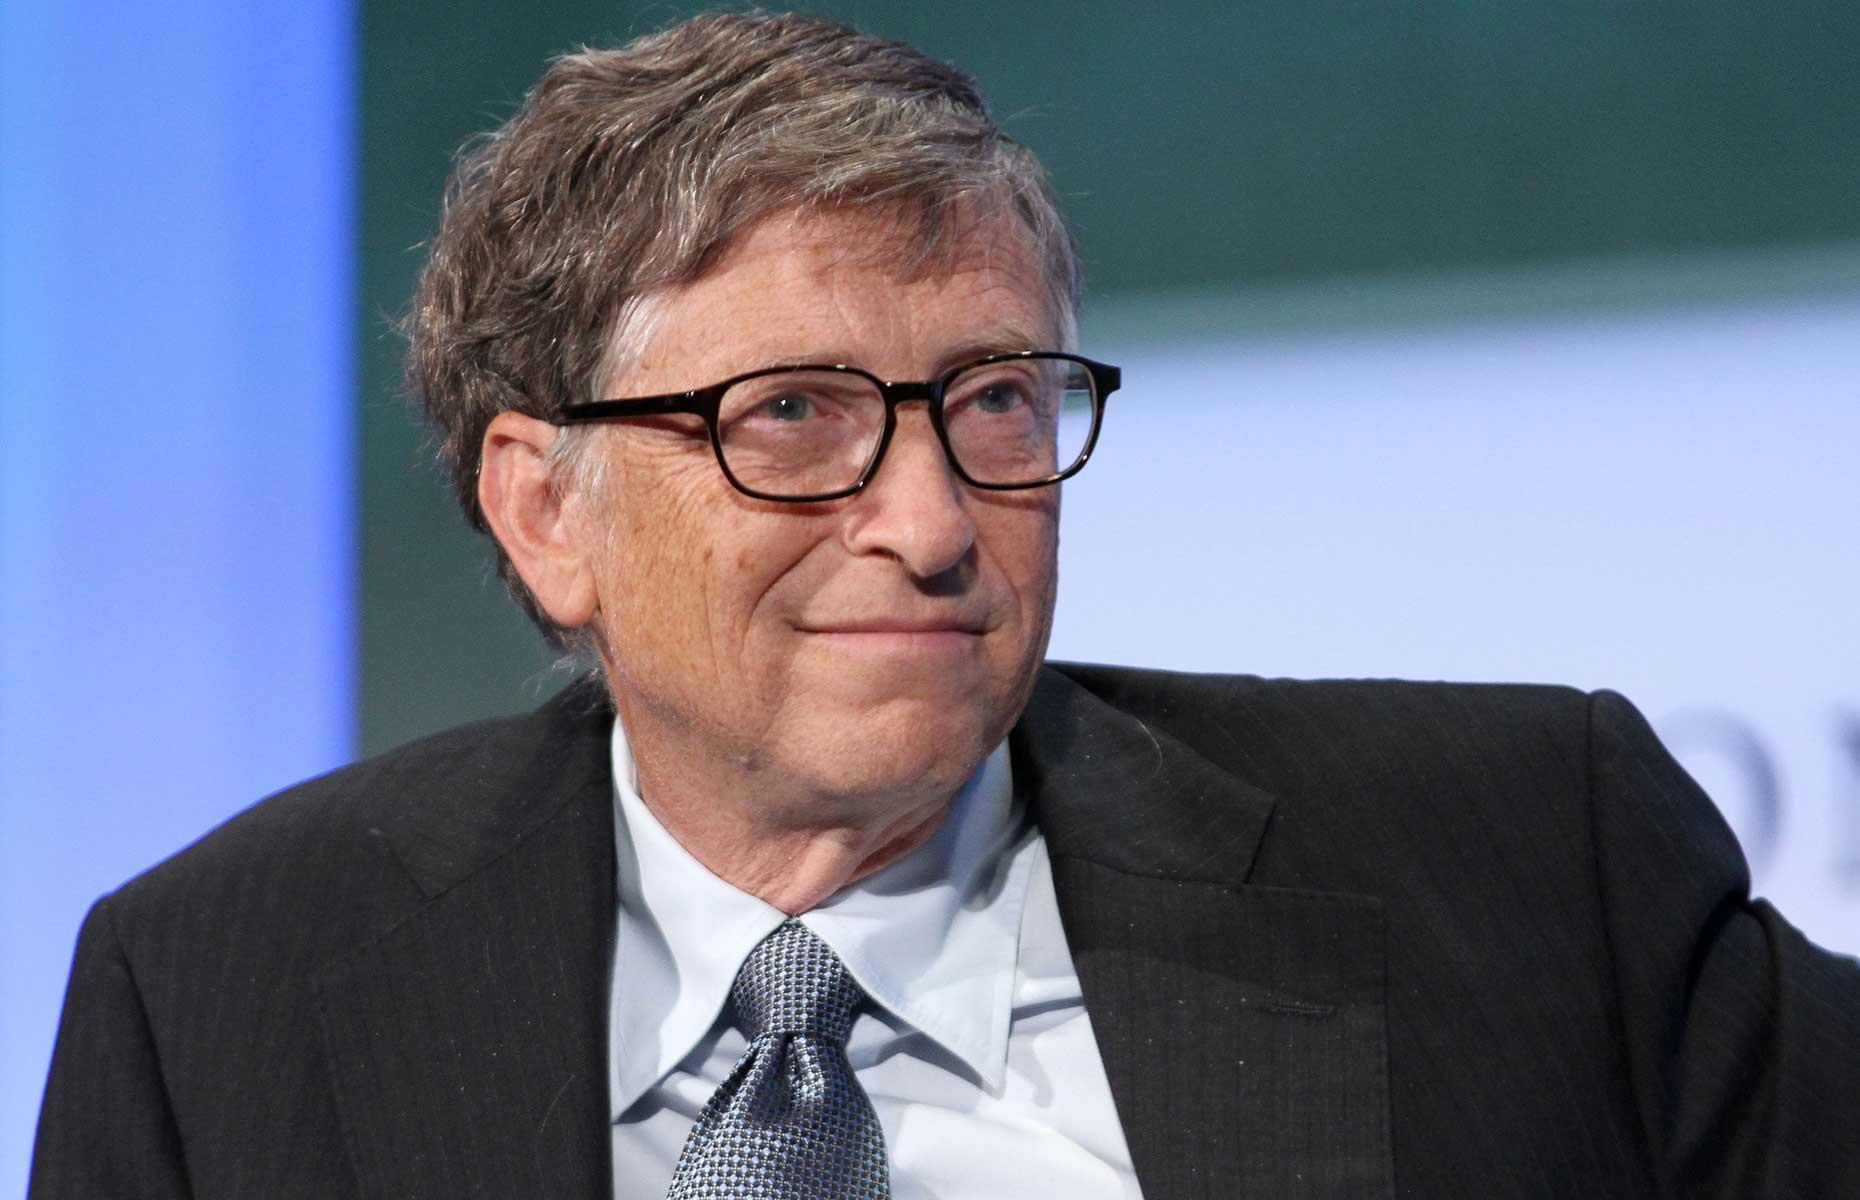 US Billionaire Asks Students To Donate The Money After Gifting